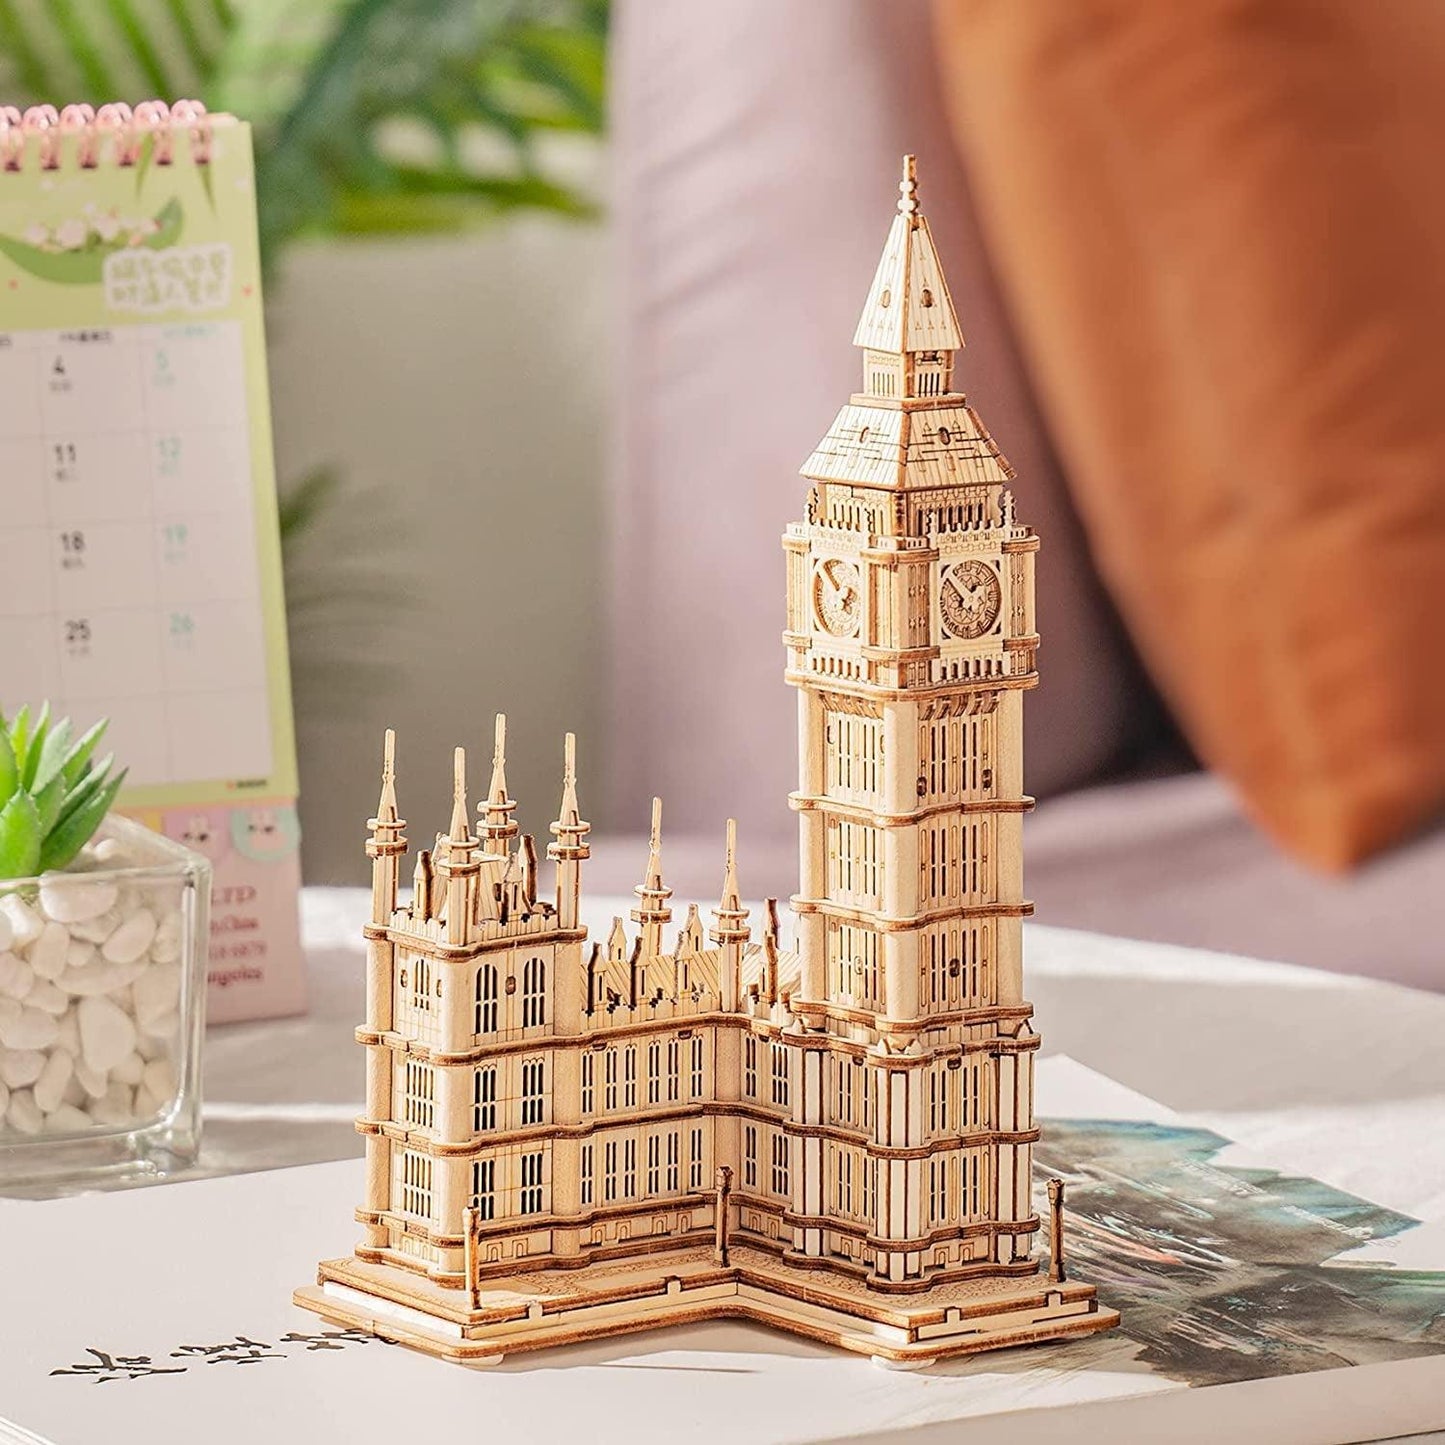 3D Puzzle for Adults Wooden Craft Kits for Teens DIY Construction Model Kit with LED Light to Build Educational Big Ben - WoodArtSupply